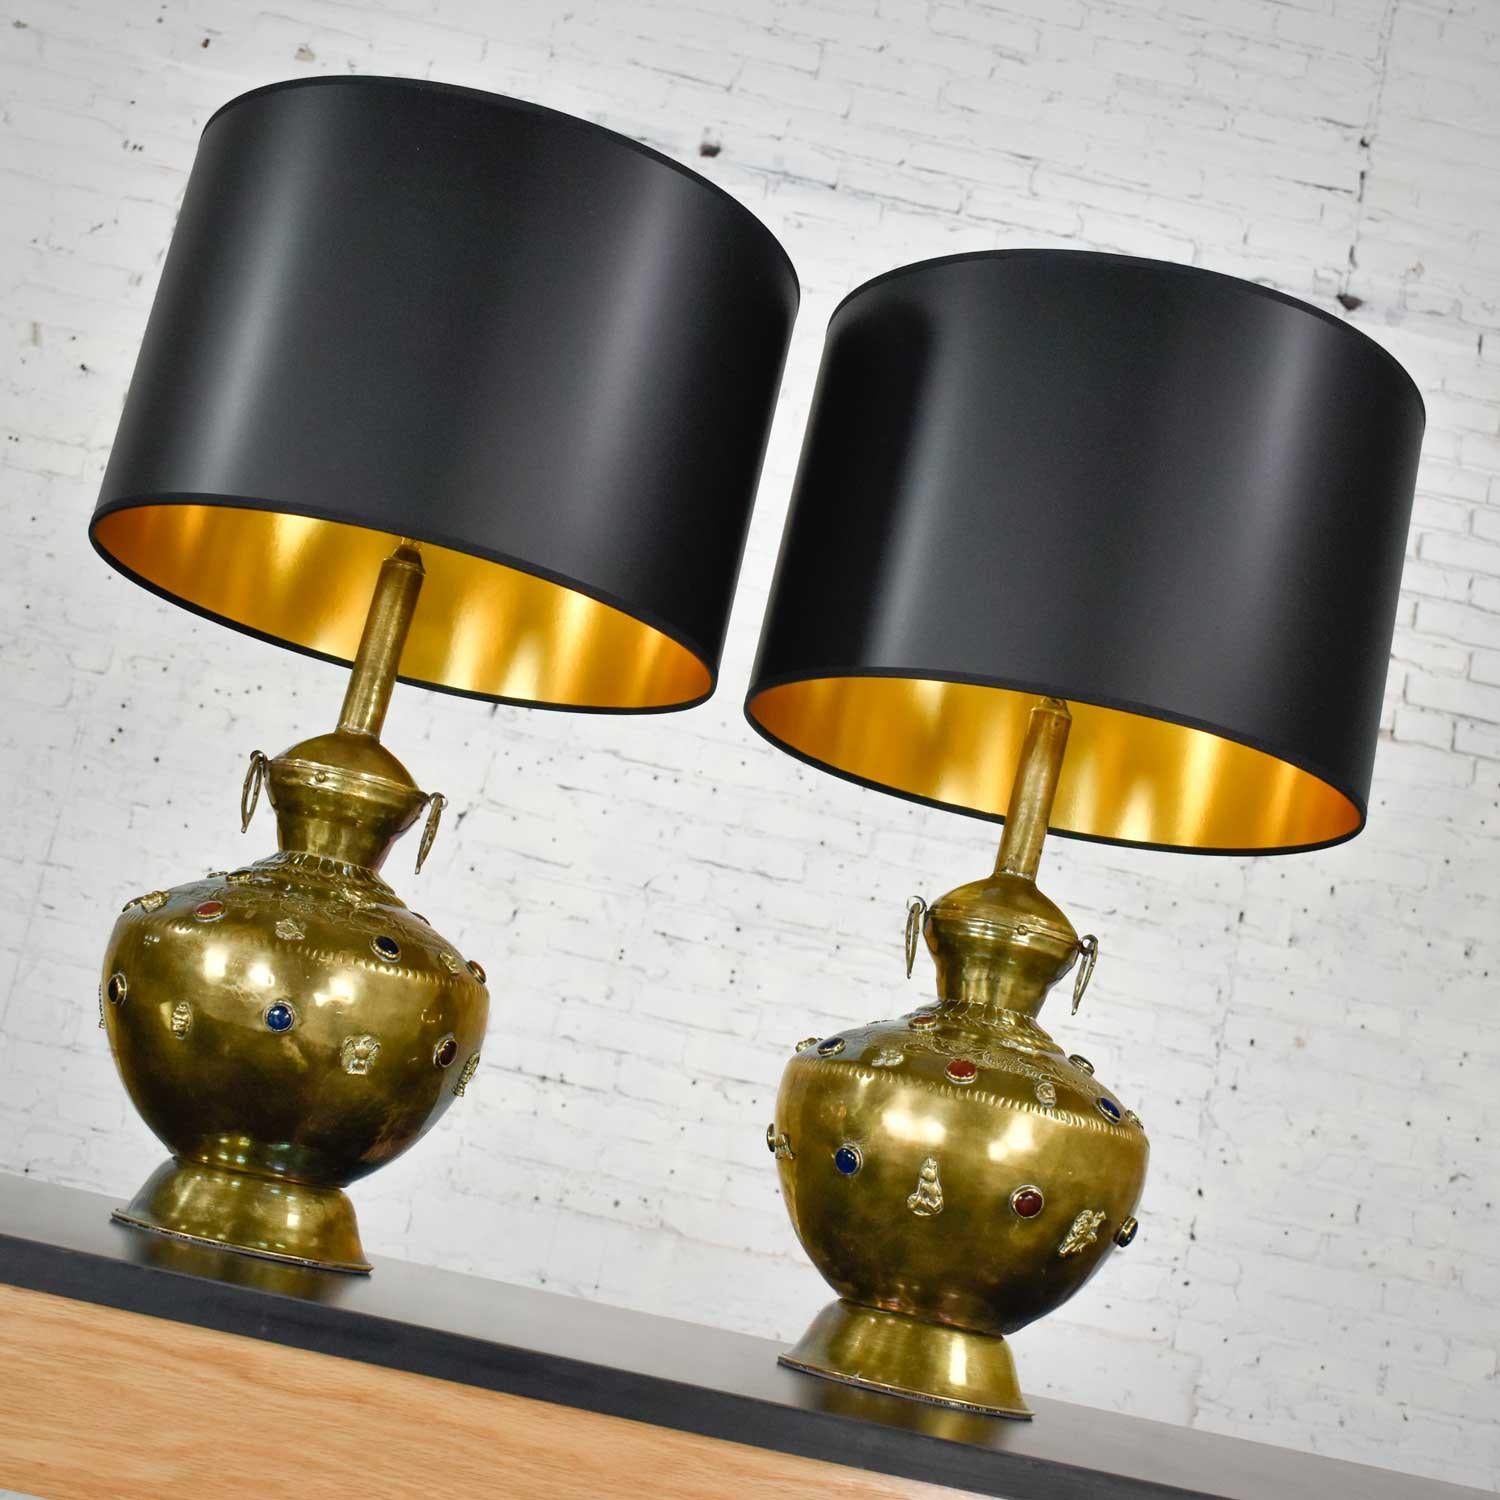 Stunning pair of hand hammered Tibetan brass lamps with glass jewels, etched and applied details, and new black Fenchel drum shades. Beautiful condition with wear as you would expect with vintage pieces. Very handmade, new wiring, and sockets with